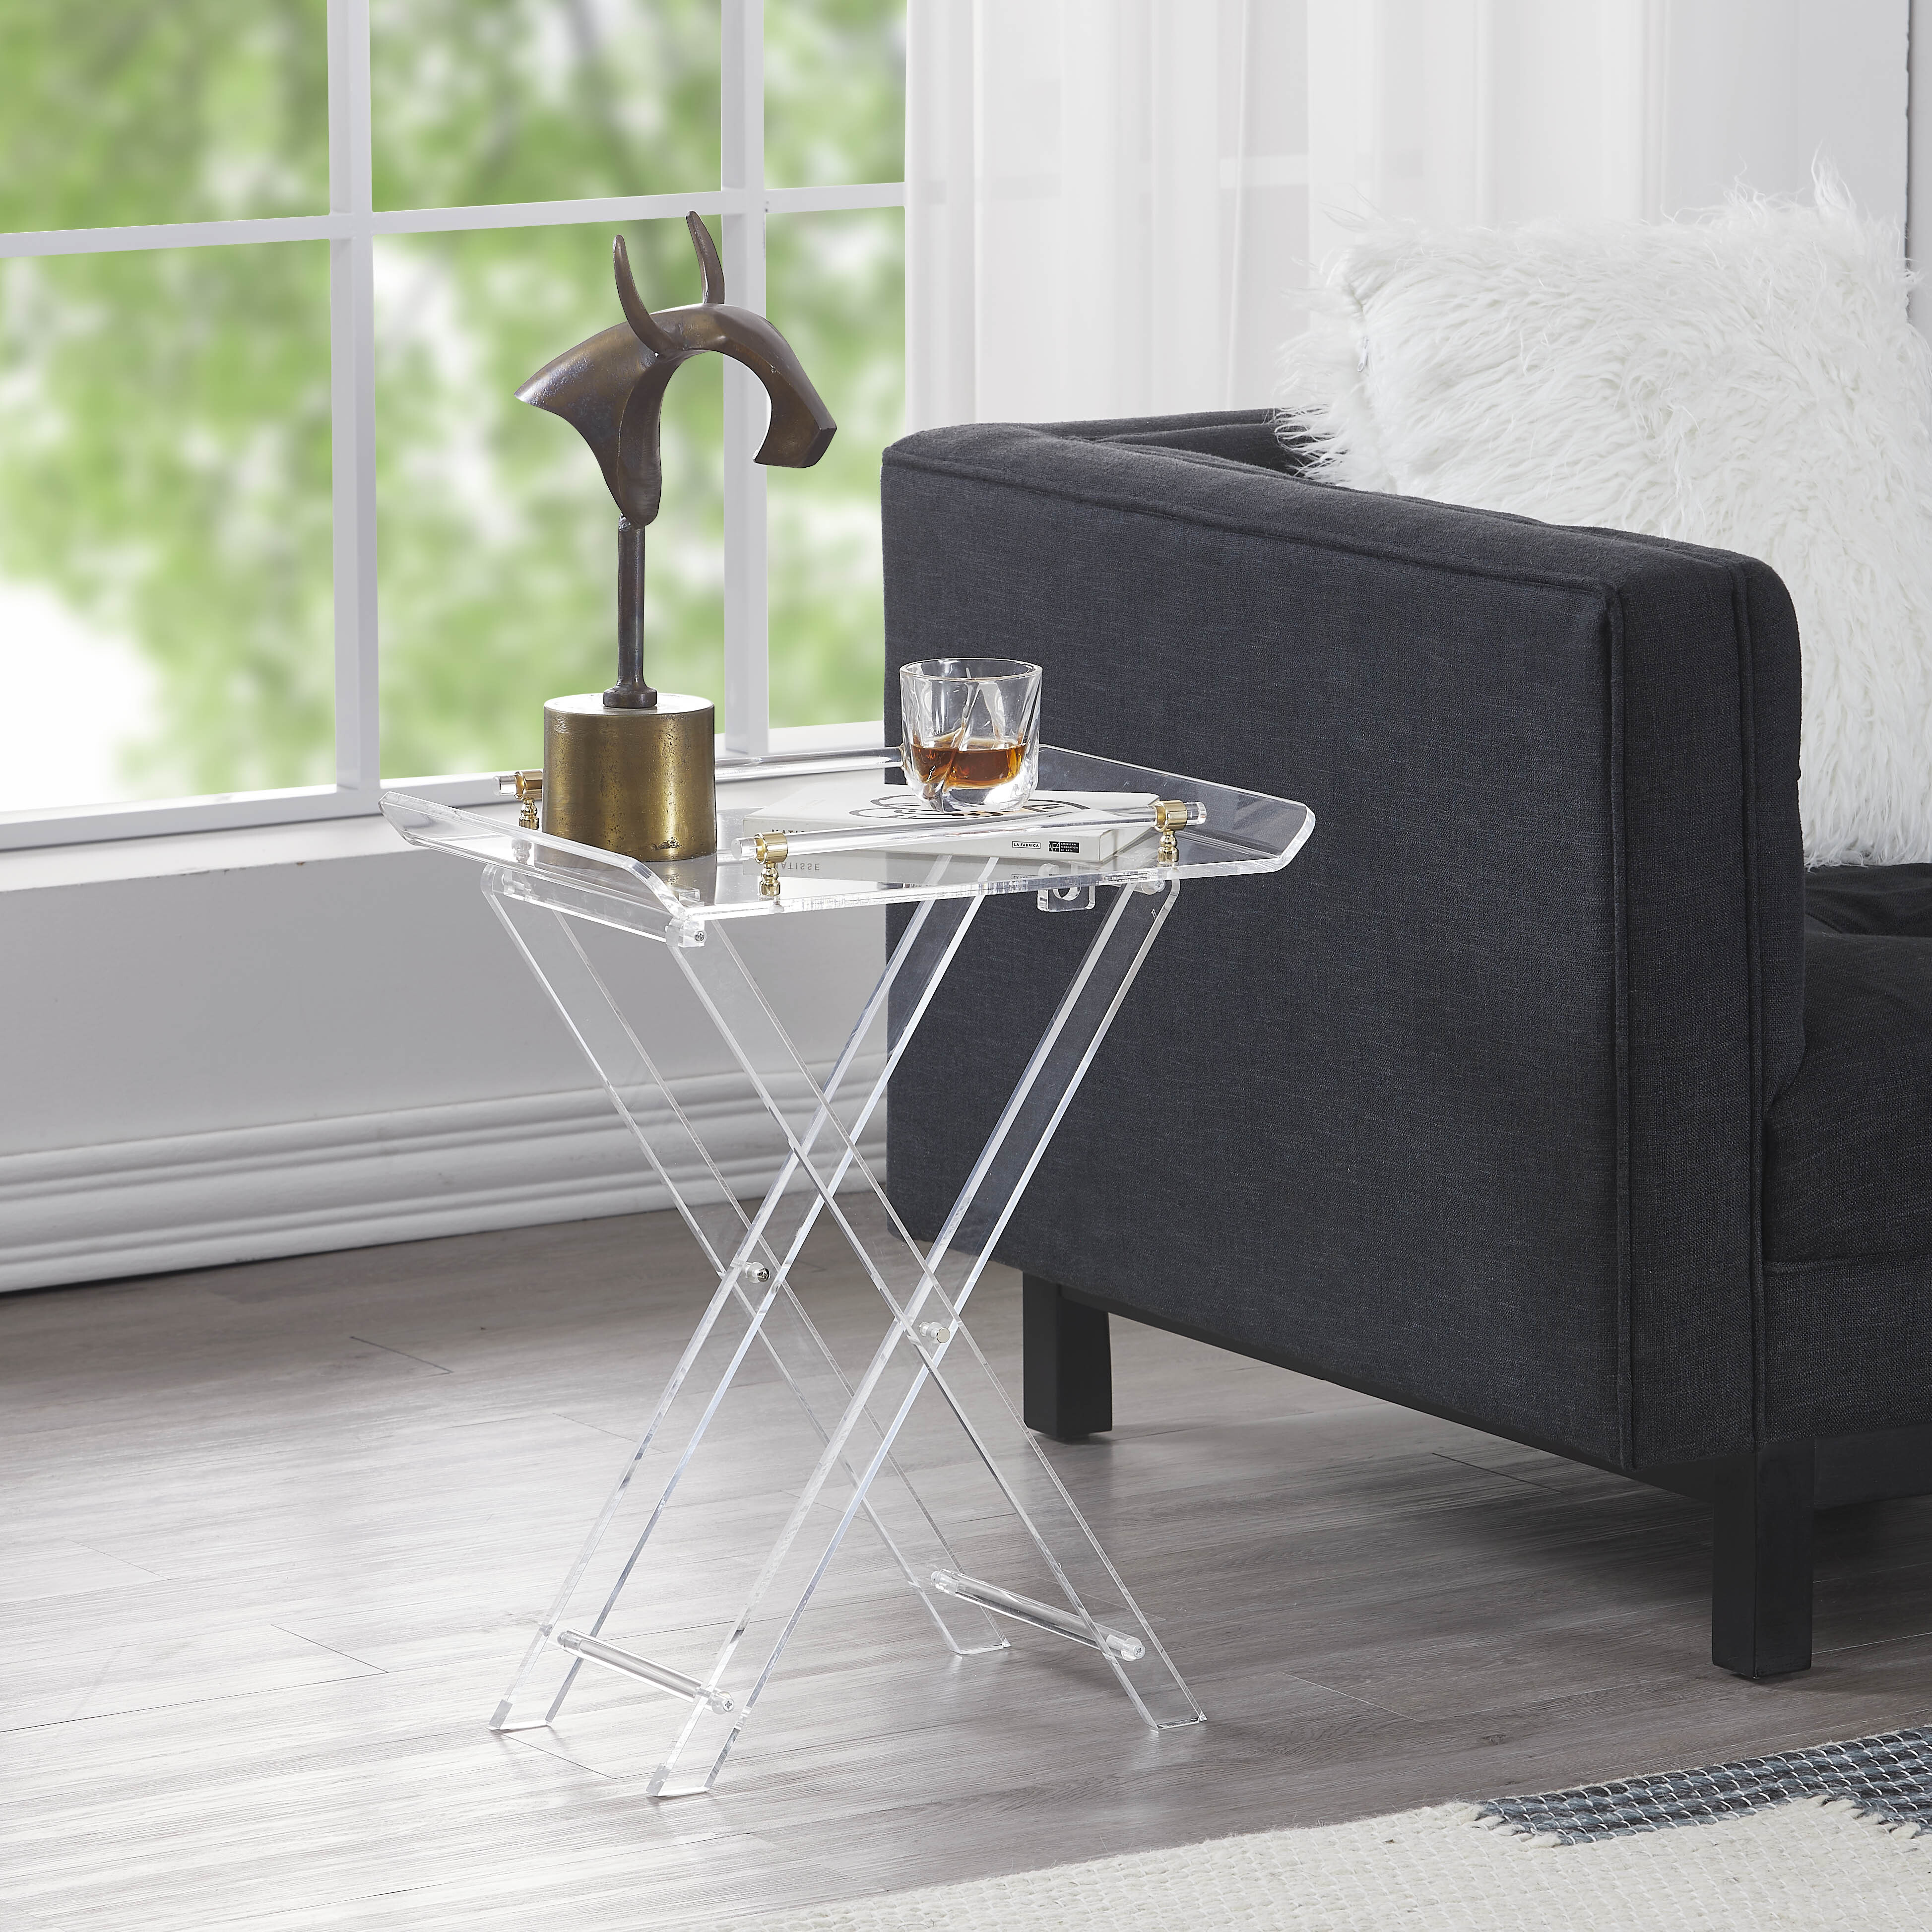 round acrylic end table with Handle for Coffee,Drink,Food,Snack